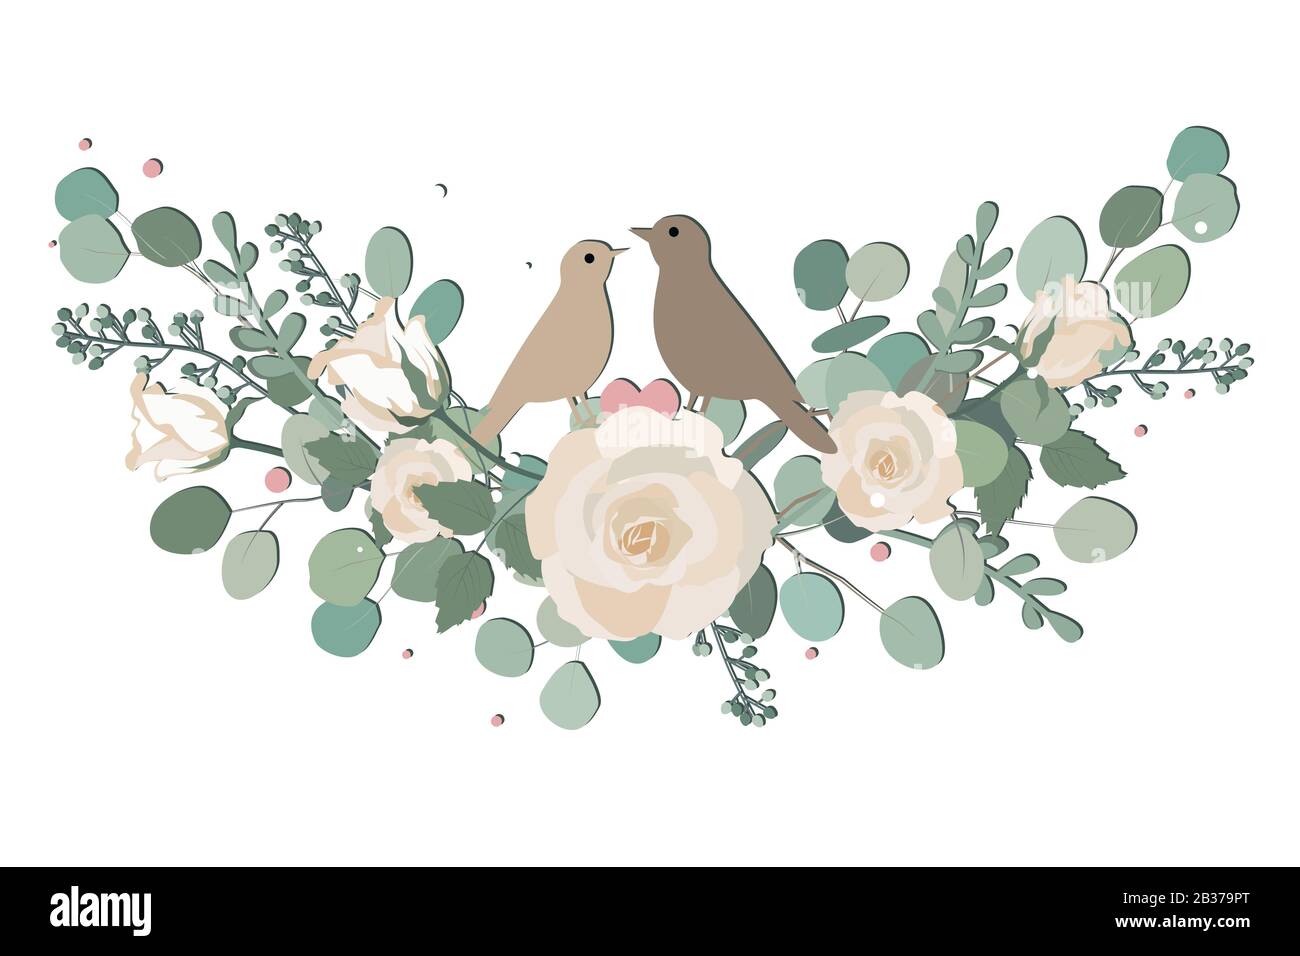 Floral vector round frame element with white rose, eucalyptus, mixed plants and cute small robin bird. Half moon shape bouquet Stock Vector